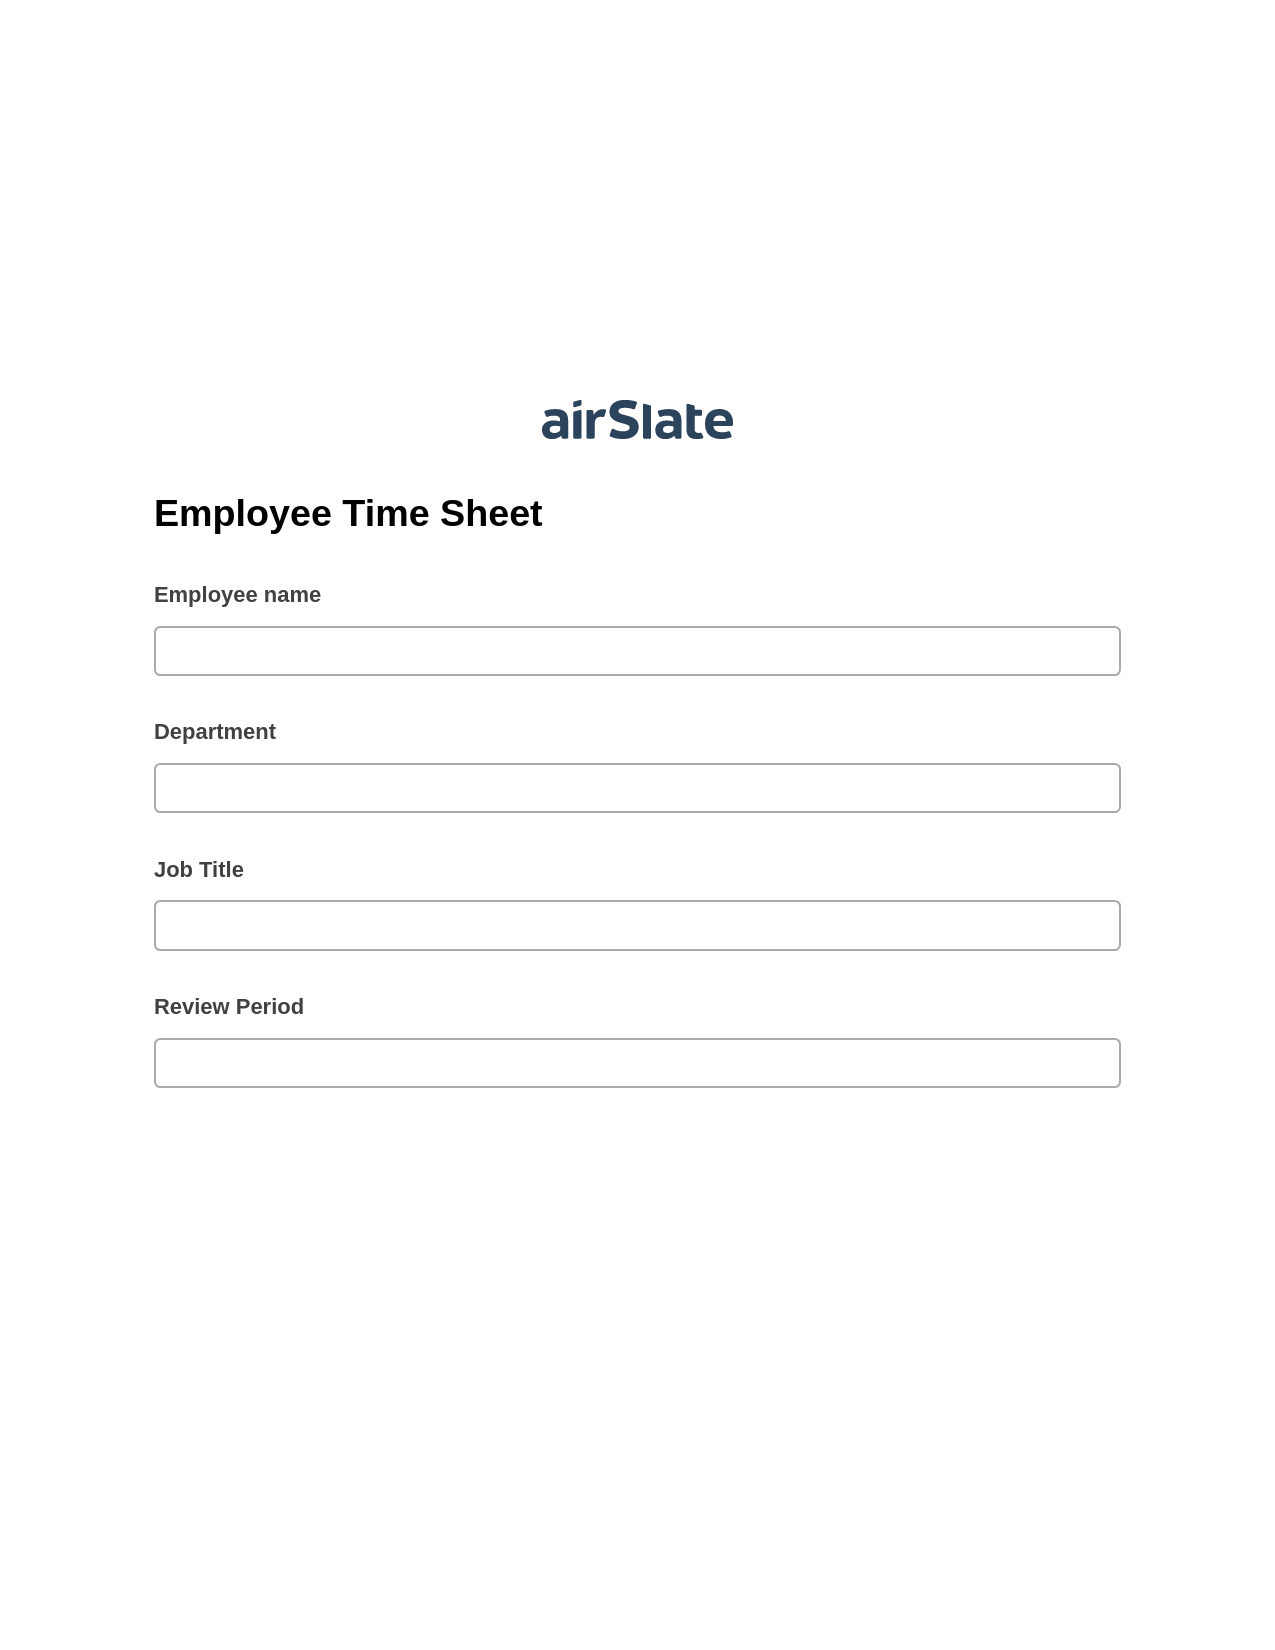 Multirole Employee Time Sheet Pre-fill from MS Dynamics 365 Records, Send Mailchimp Campaign Bot, Export to WebMerge Bot